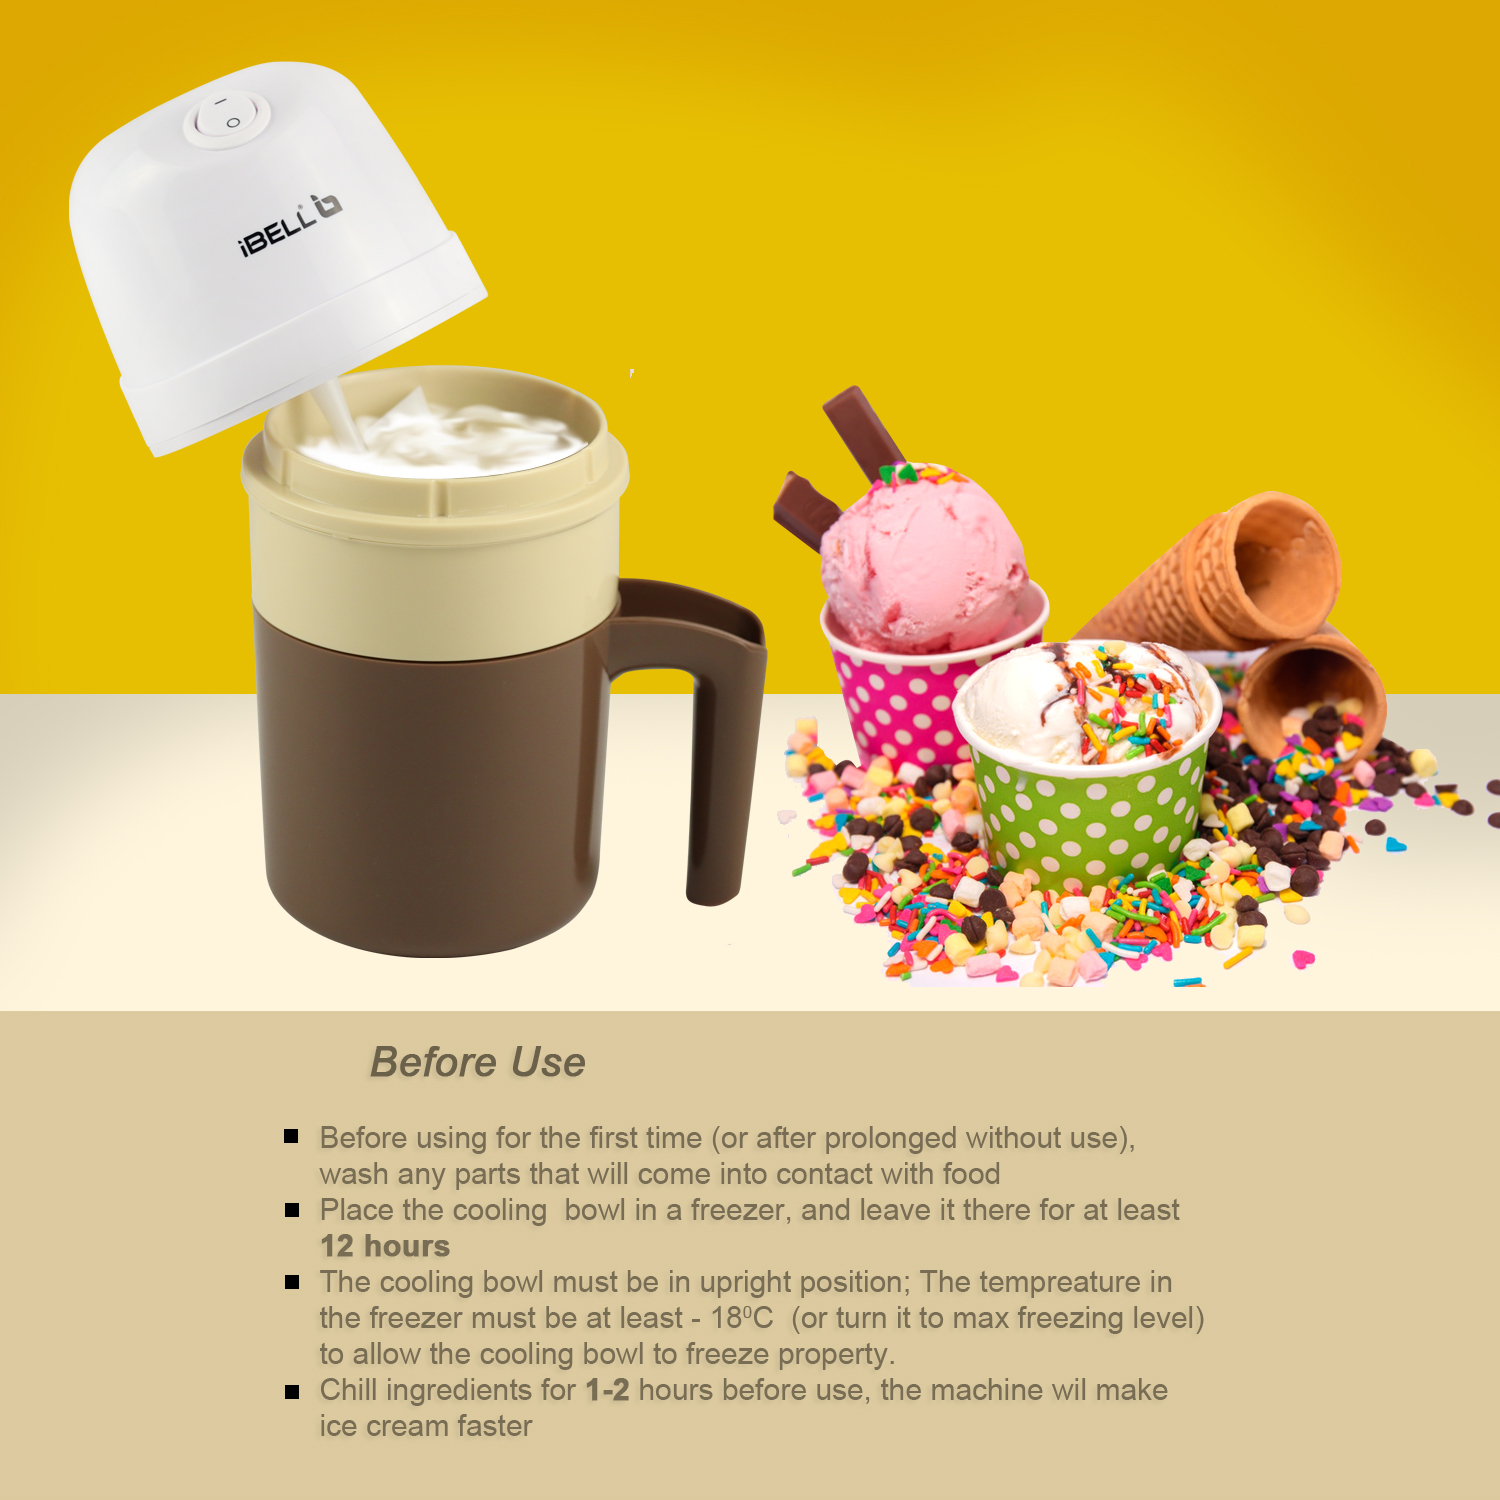 Ibell 400ml ice cream maker 7w paddle that rotates in both direction white